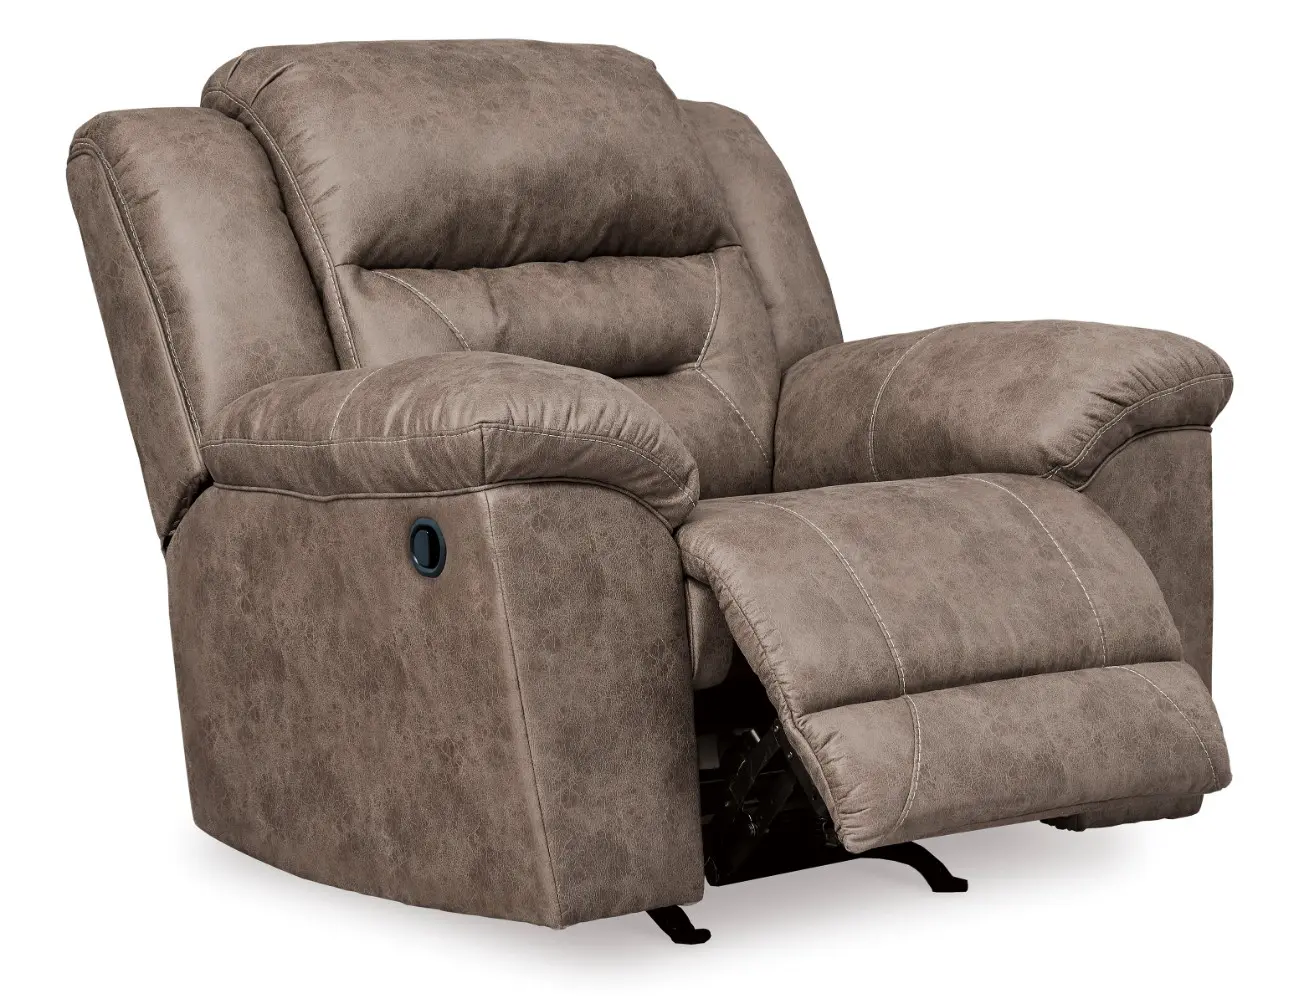 A brown recliner with two arms and one arm.